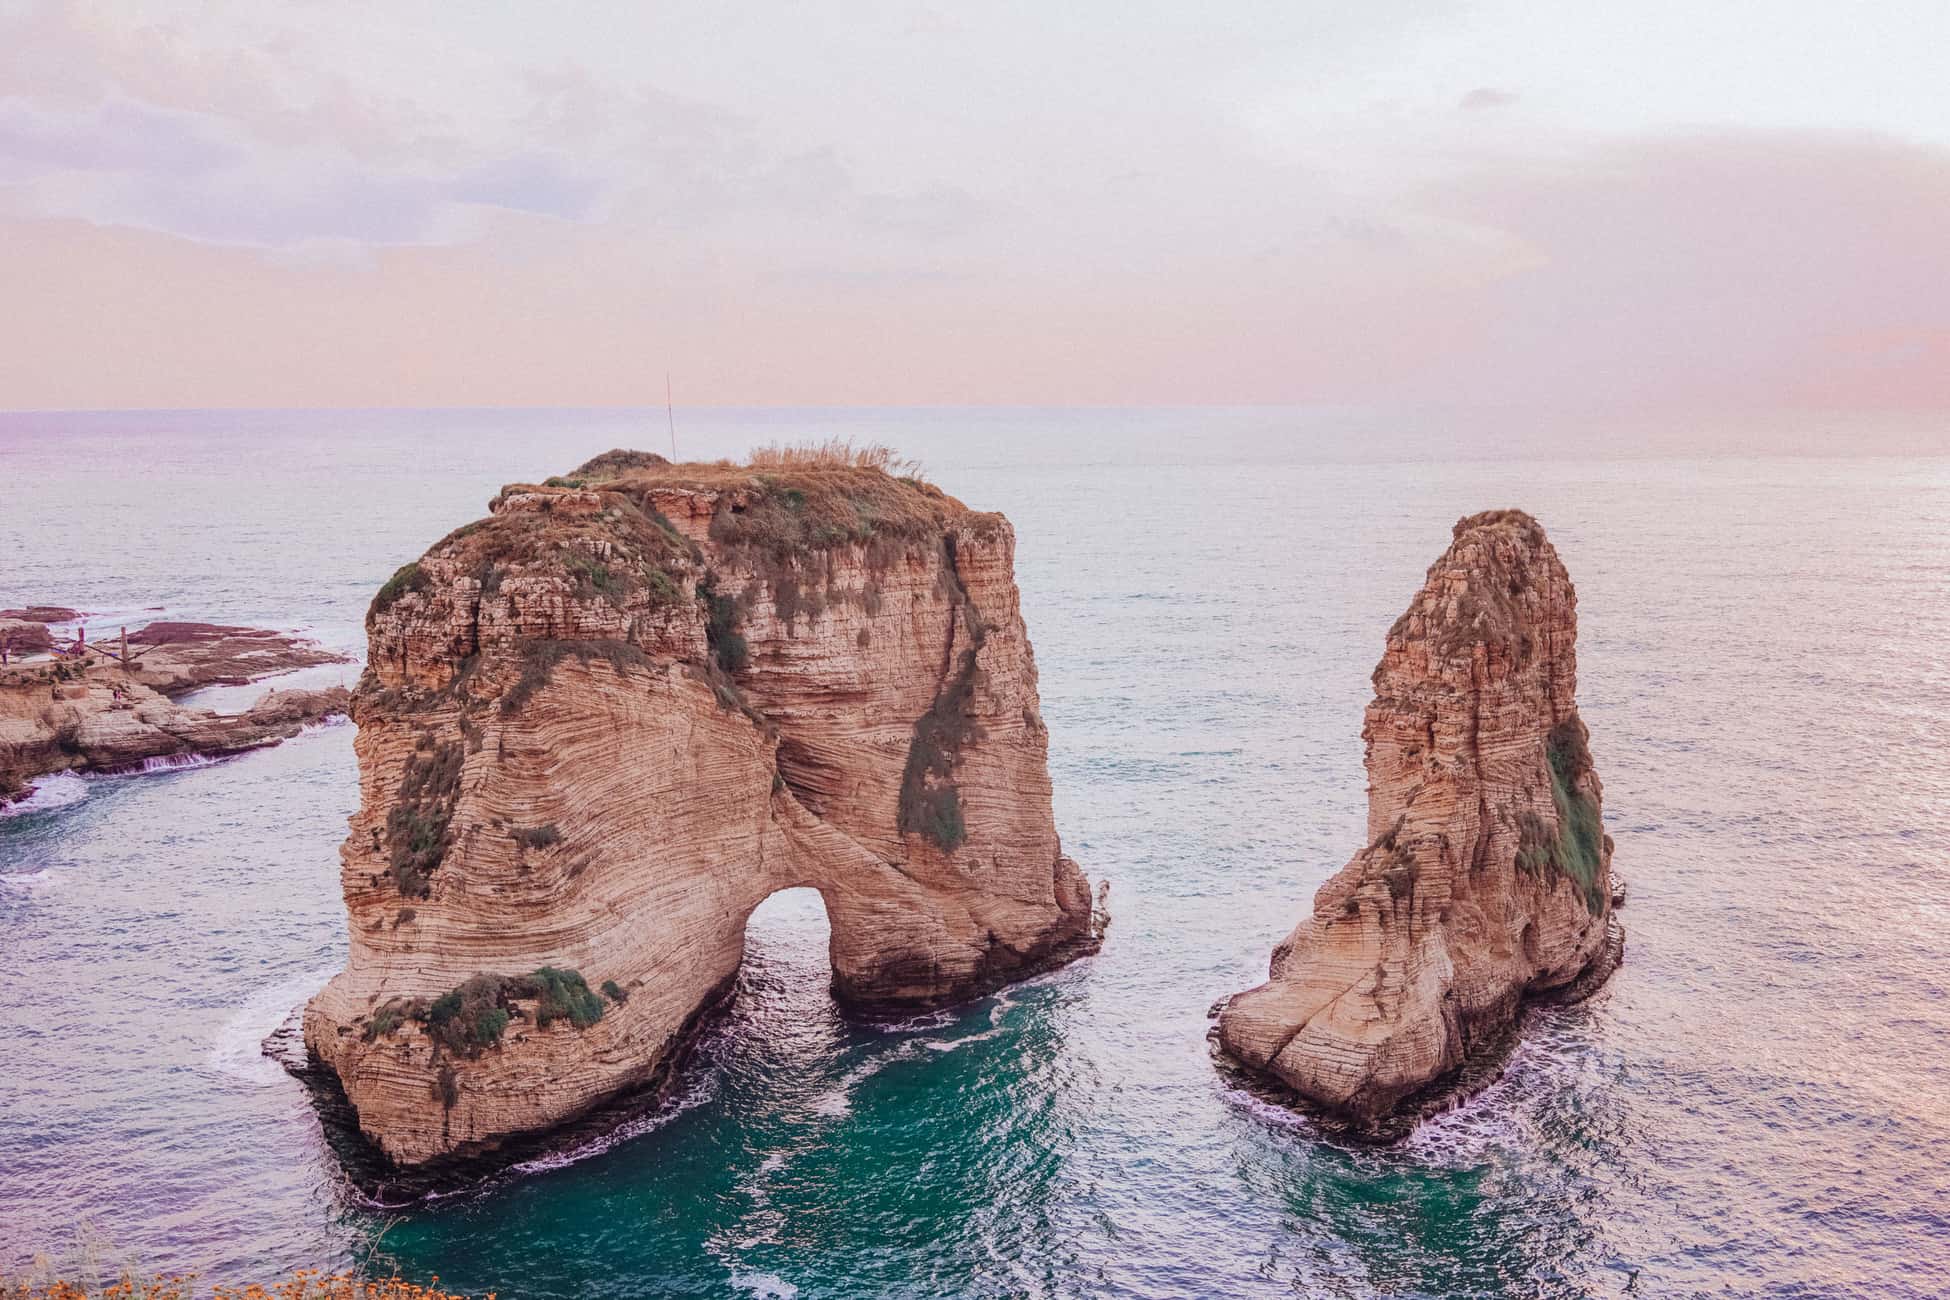 Most Instagrammable places in Beirut and Lebanon | Lebanon photo locations